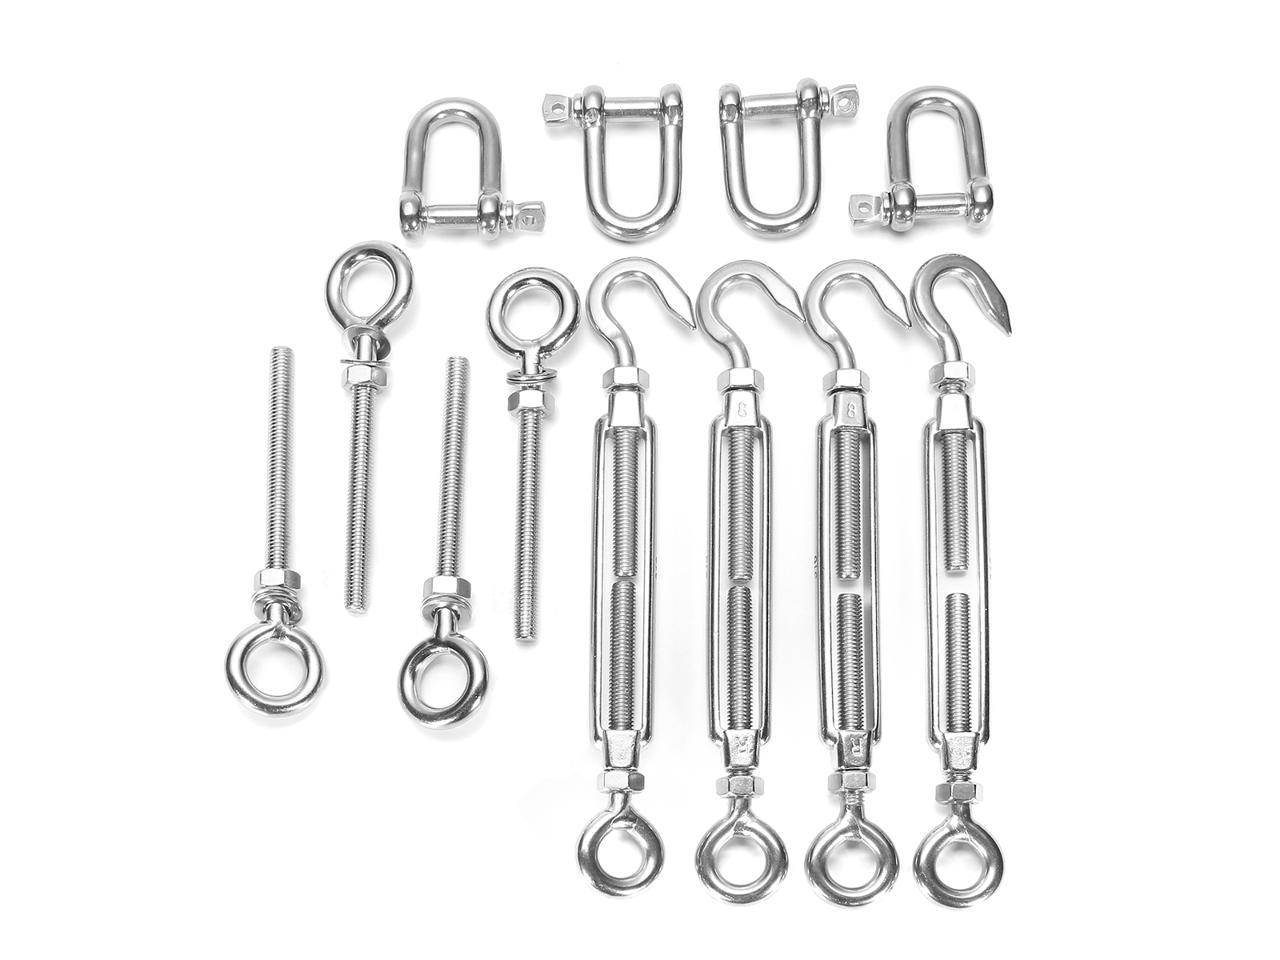 Stainless Steel Sun Fixing Fittings Sail Shade Kits Garden Awning Canopy Tools 